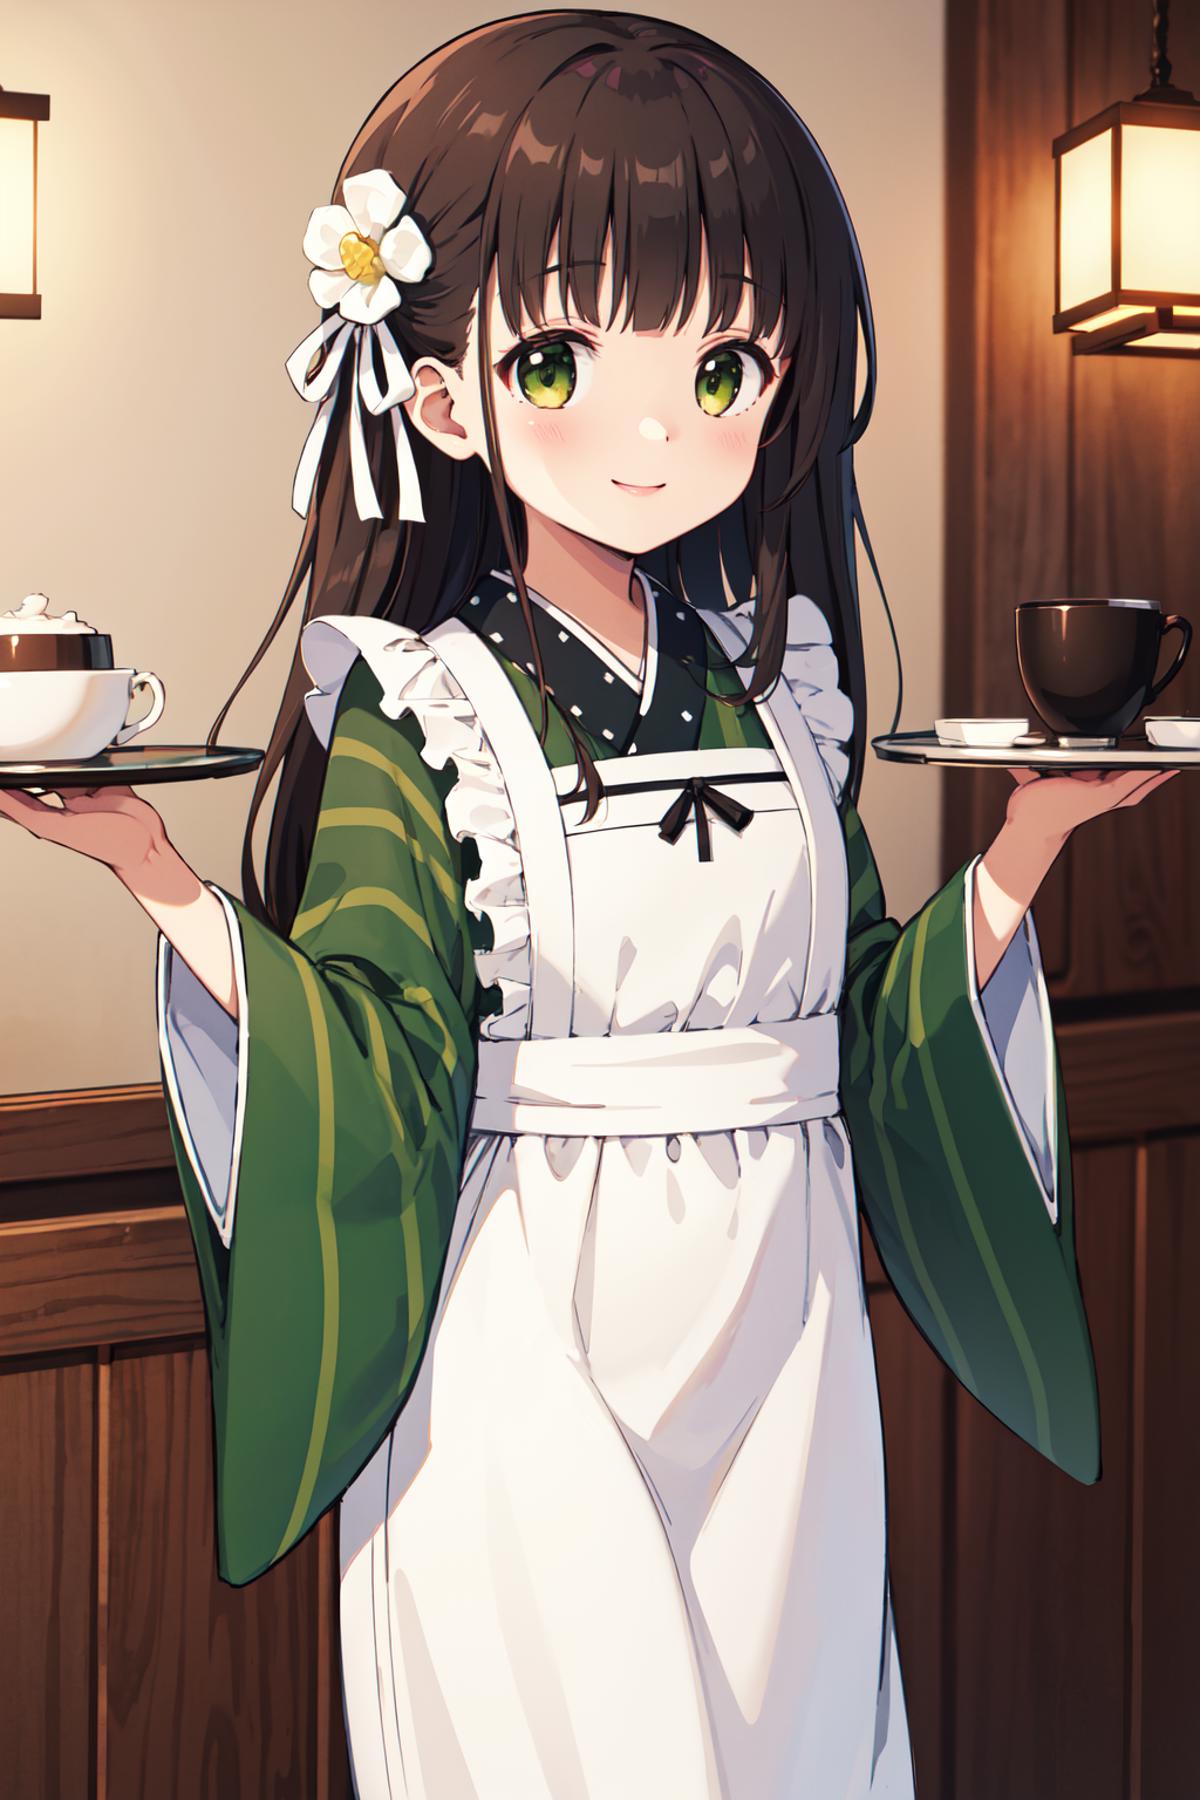 A cartoon anime girl with green eyes and a white ribbon in her hair, dressed in an apron and holding a tray of coffee cups and saucers.